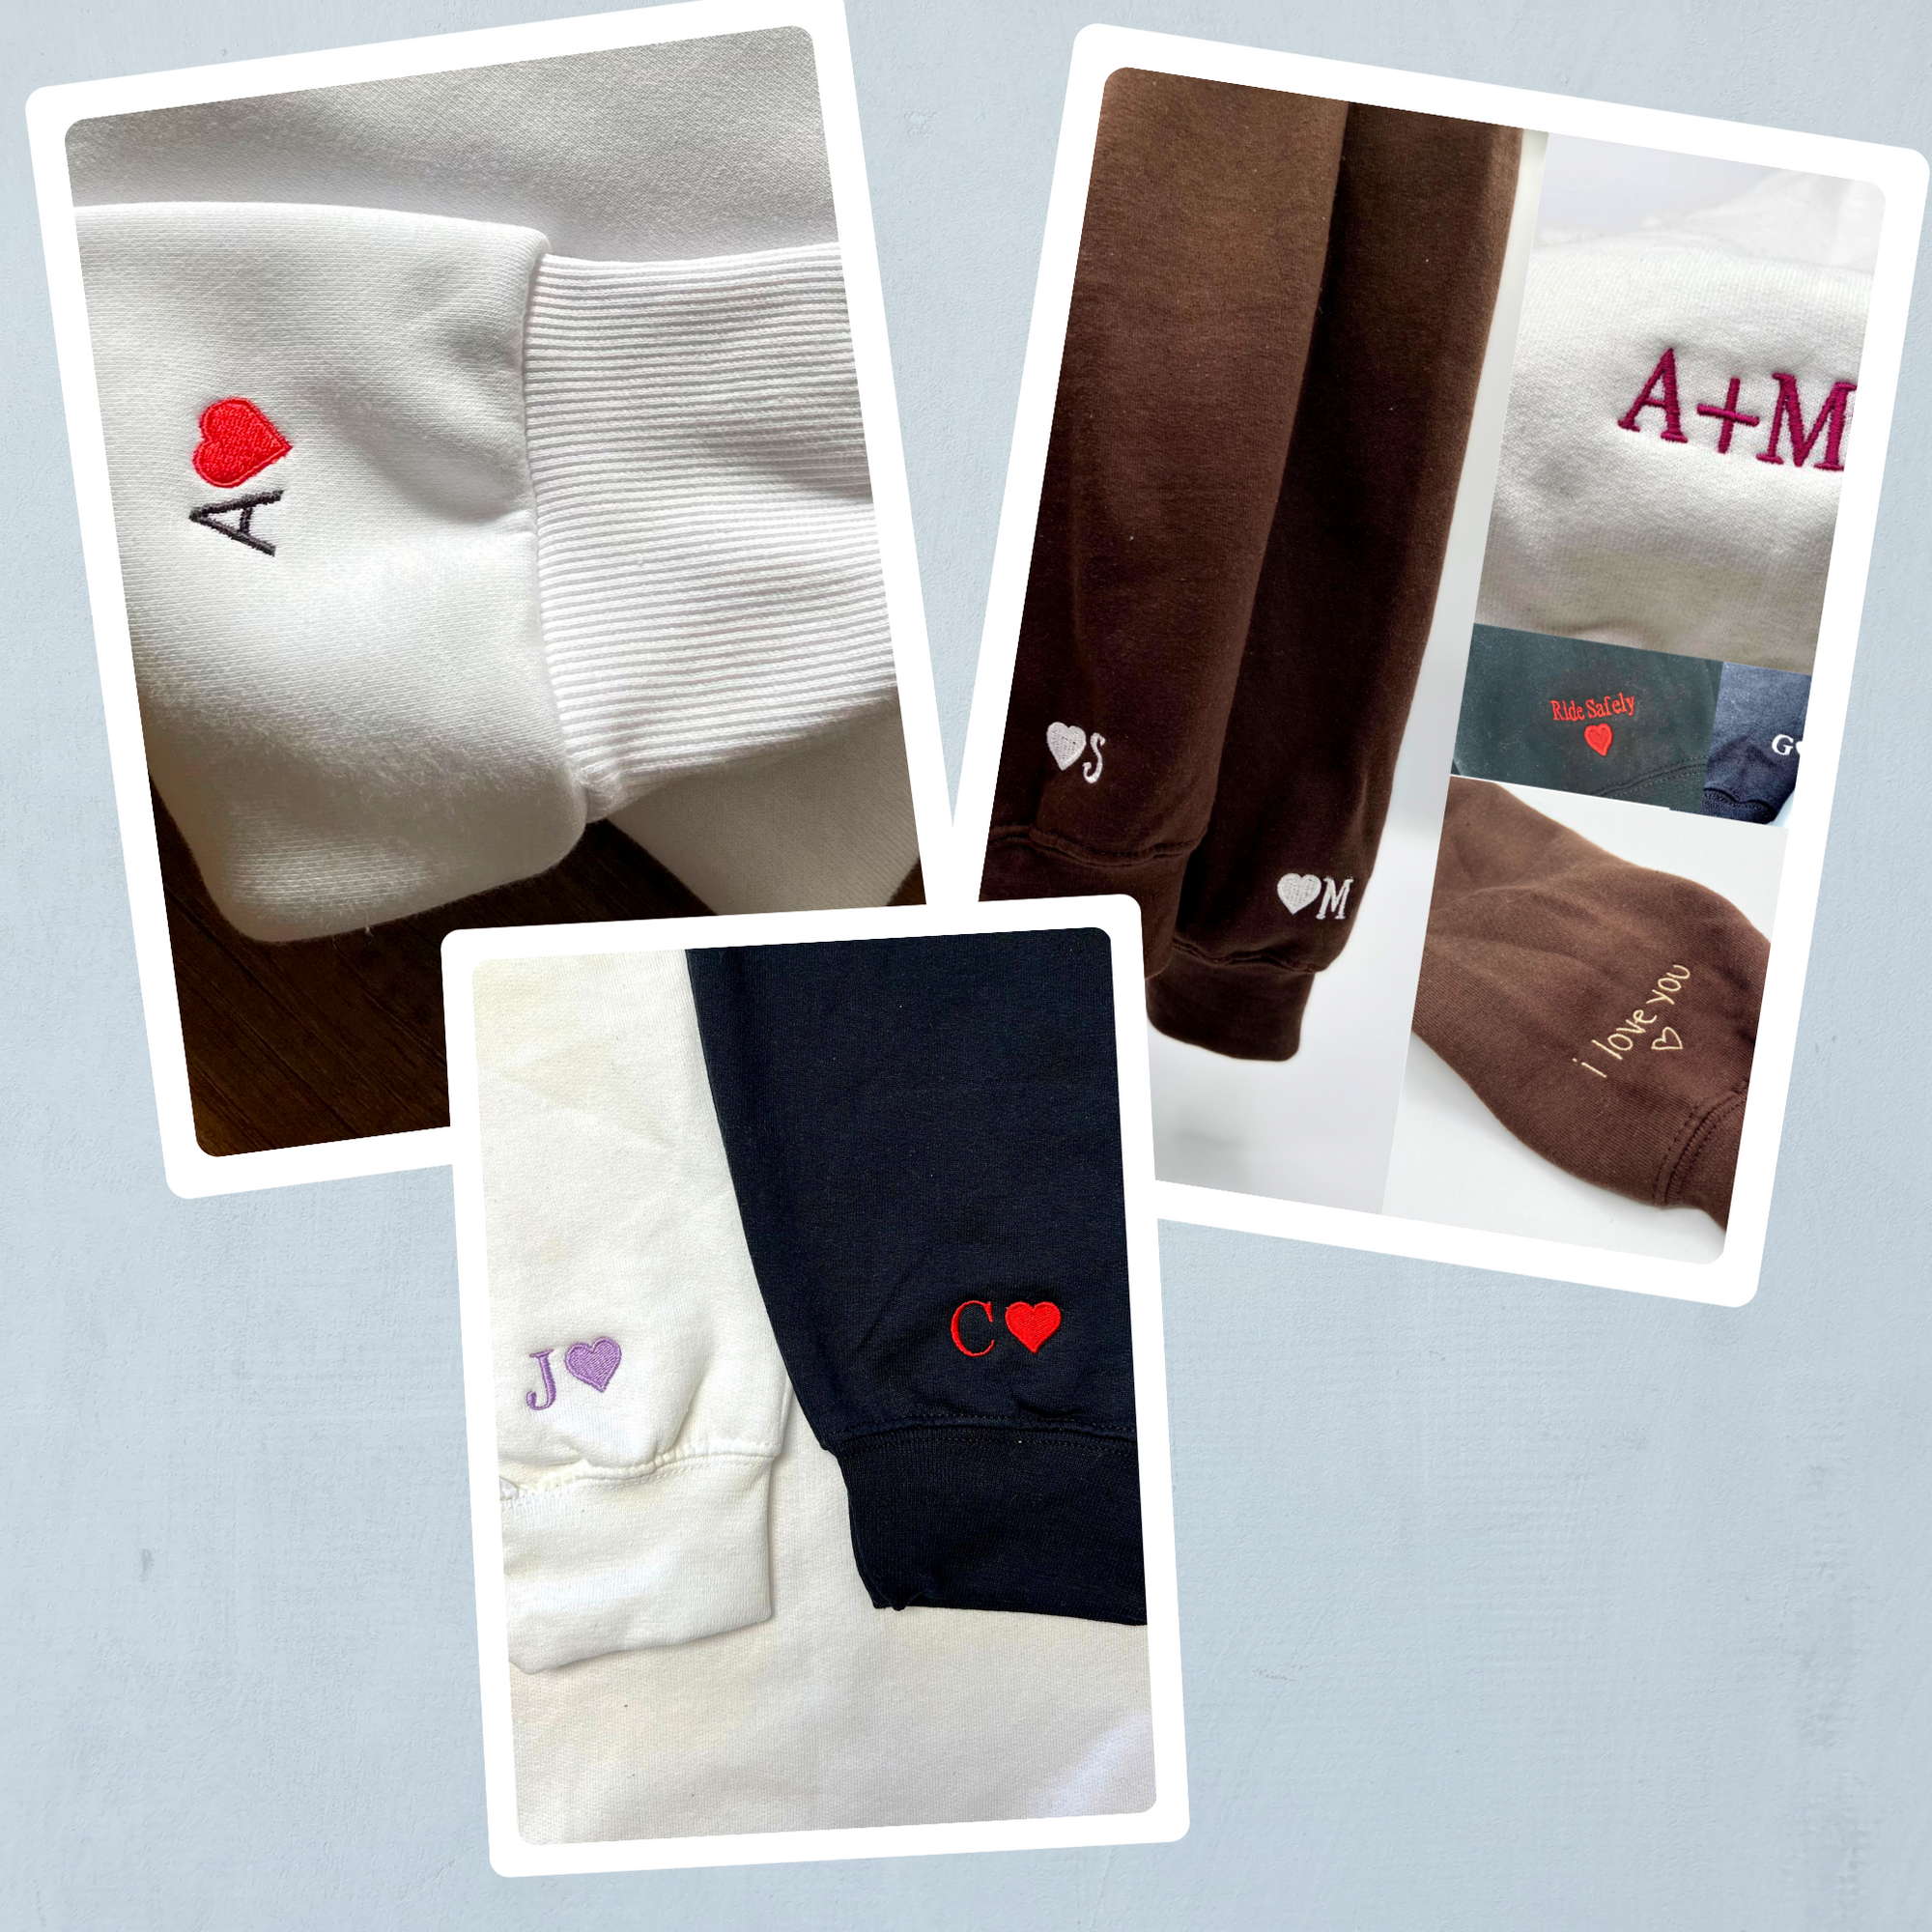 Custom Embroidered Hoodies For Couples, Cute Hans and Leia Couples Embroidered Hoodie